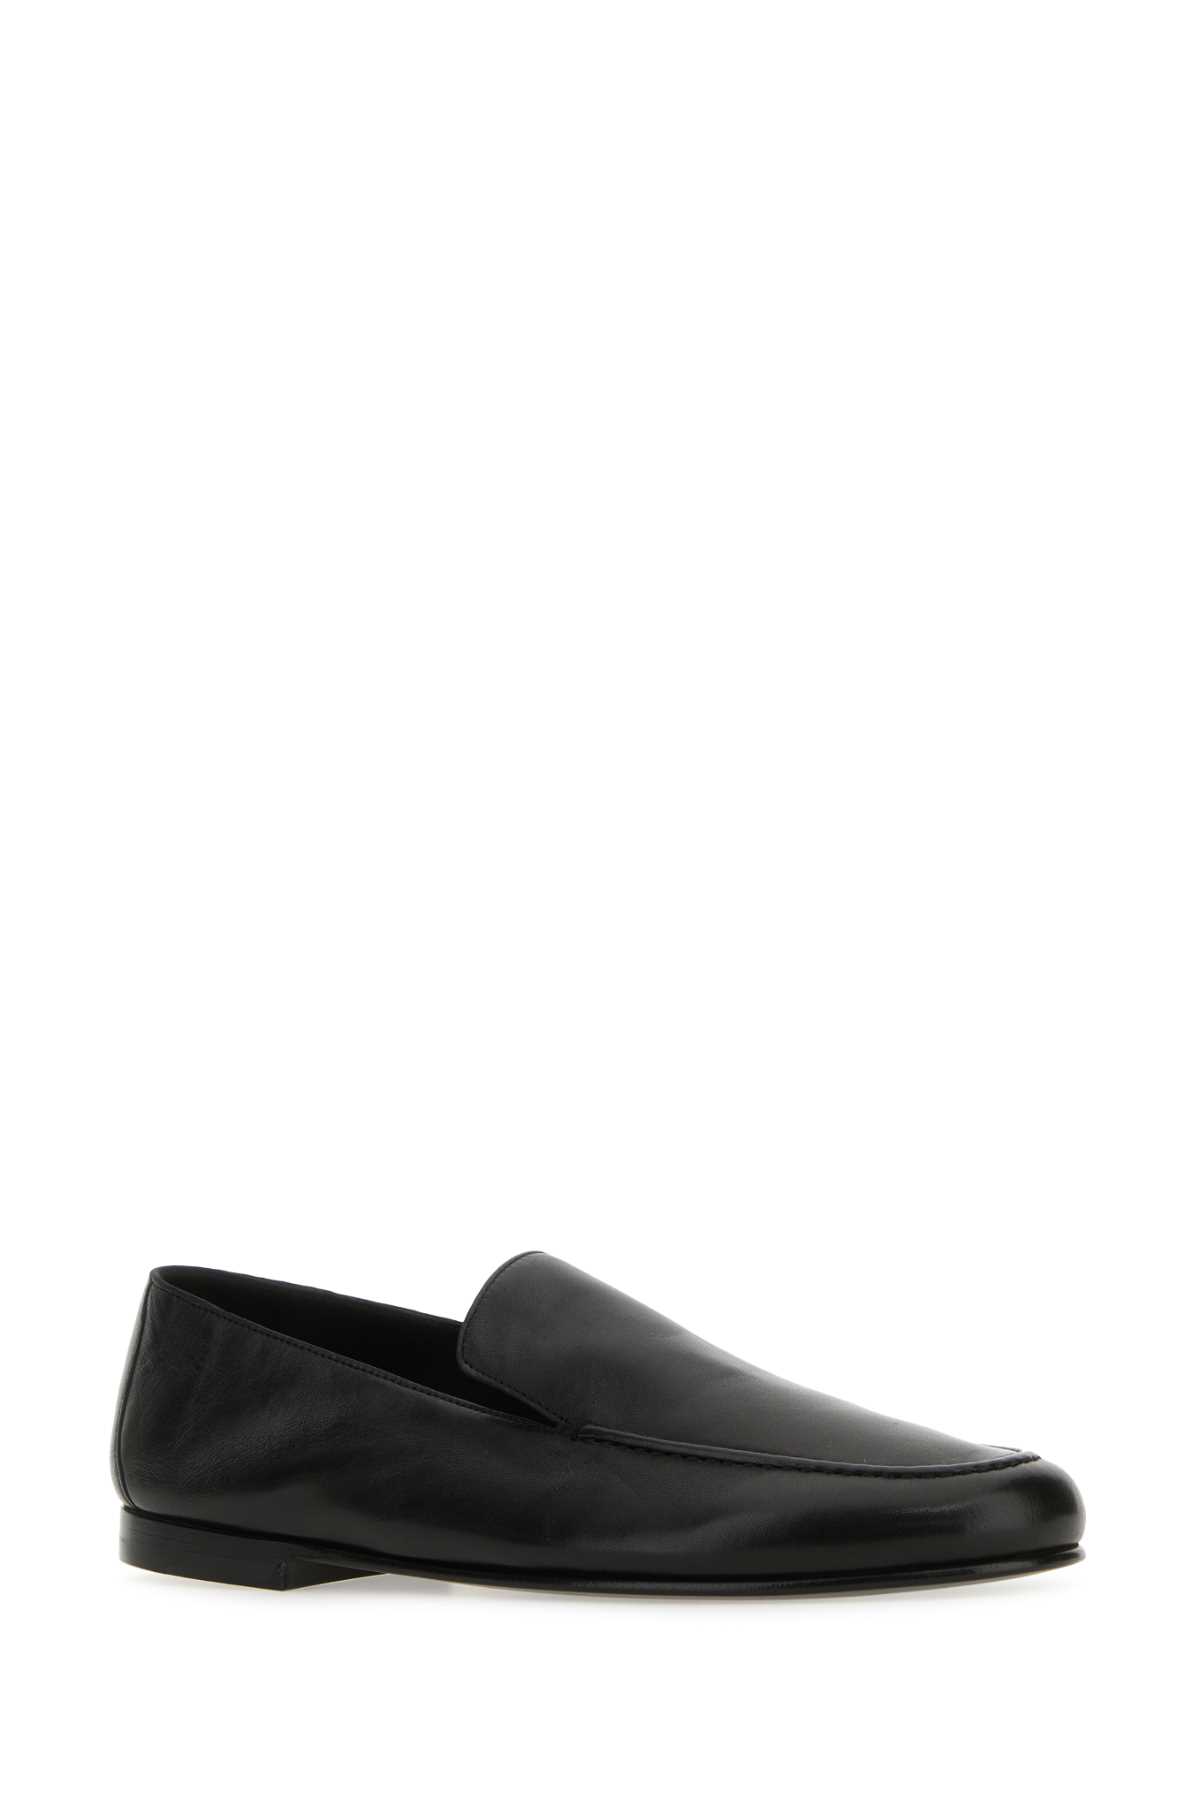 THE ROW BLACK LEATHER COLETTE LOAFERS